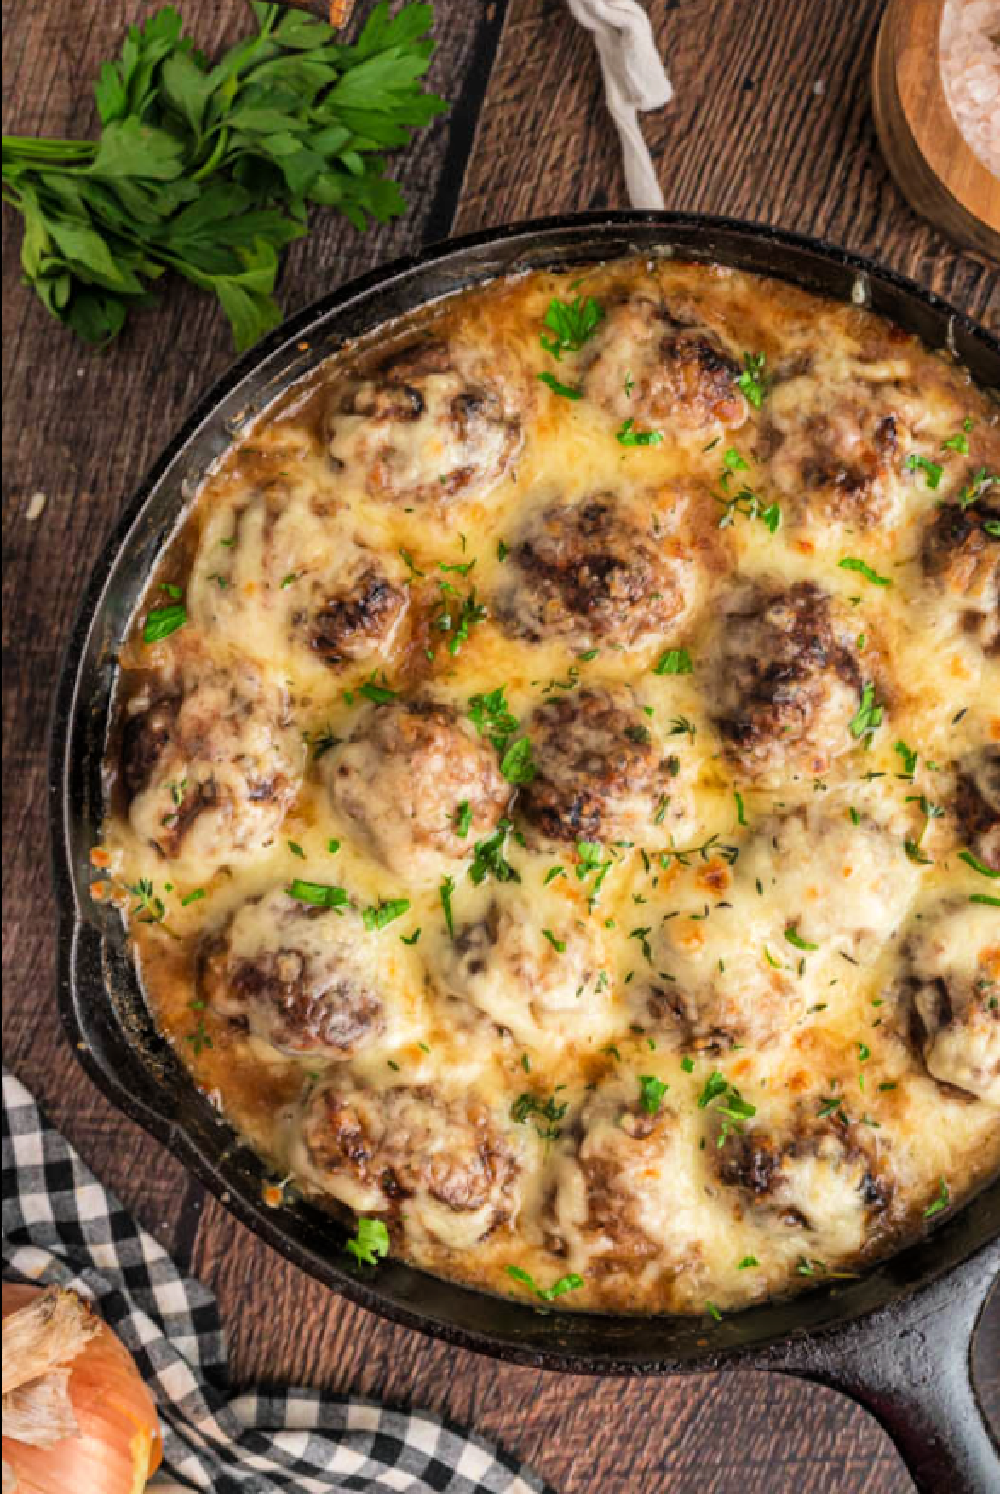 Baked French Onion Meatballs in a cast iron skillet topped with melted gooey cheese and fresh thyme